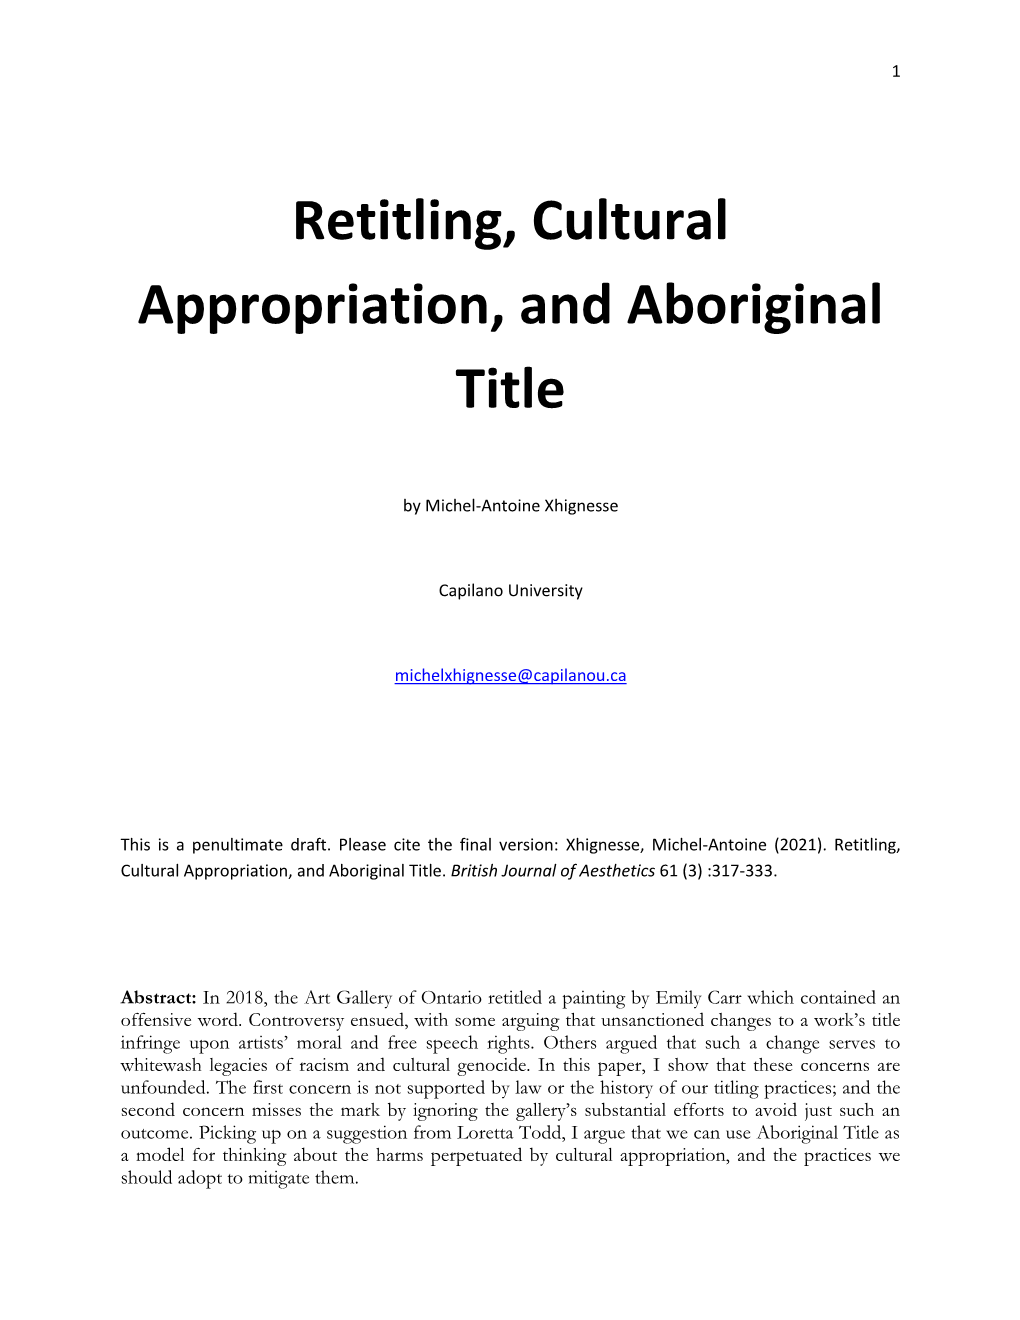 Retitling, Cultural Appropriation, and Aboriginal Title